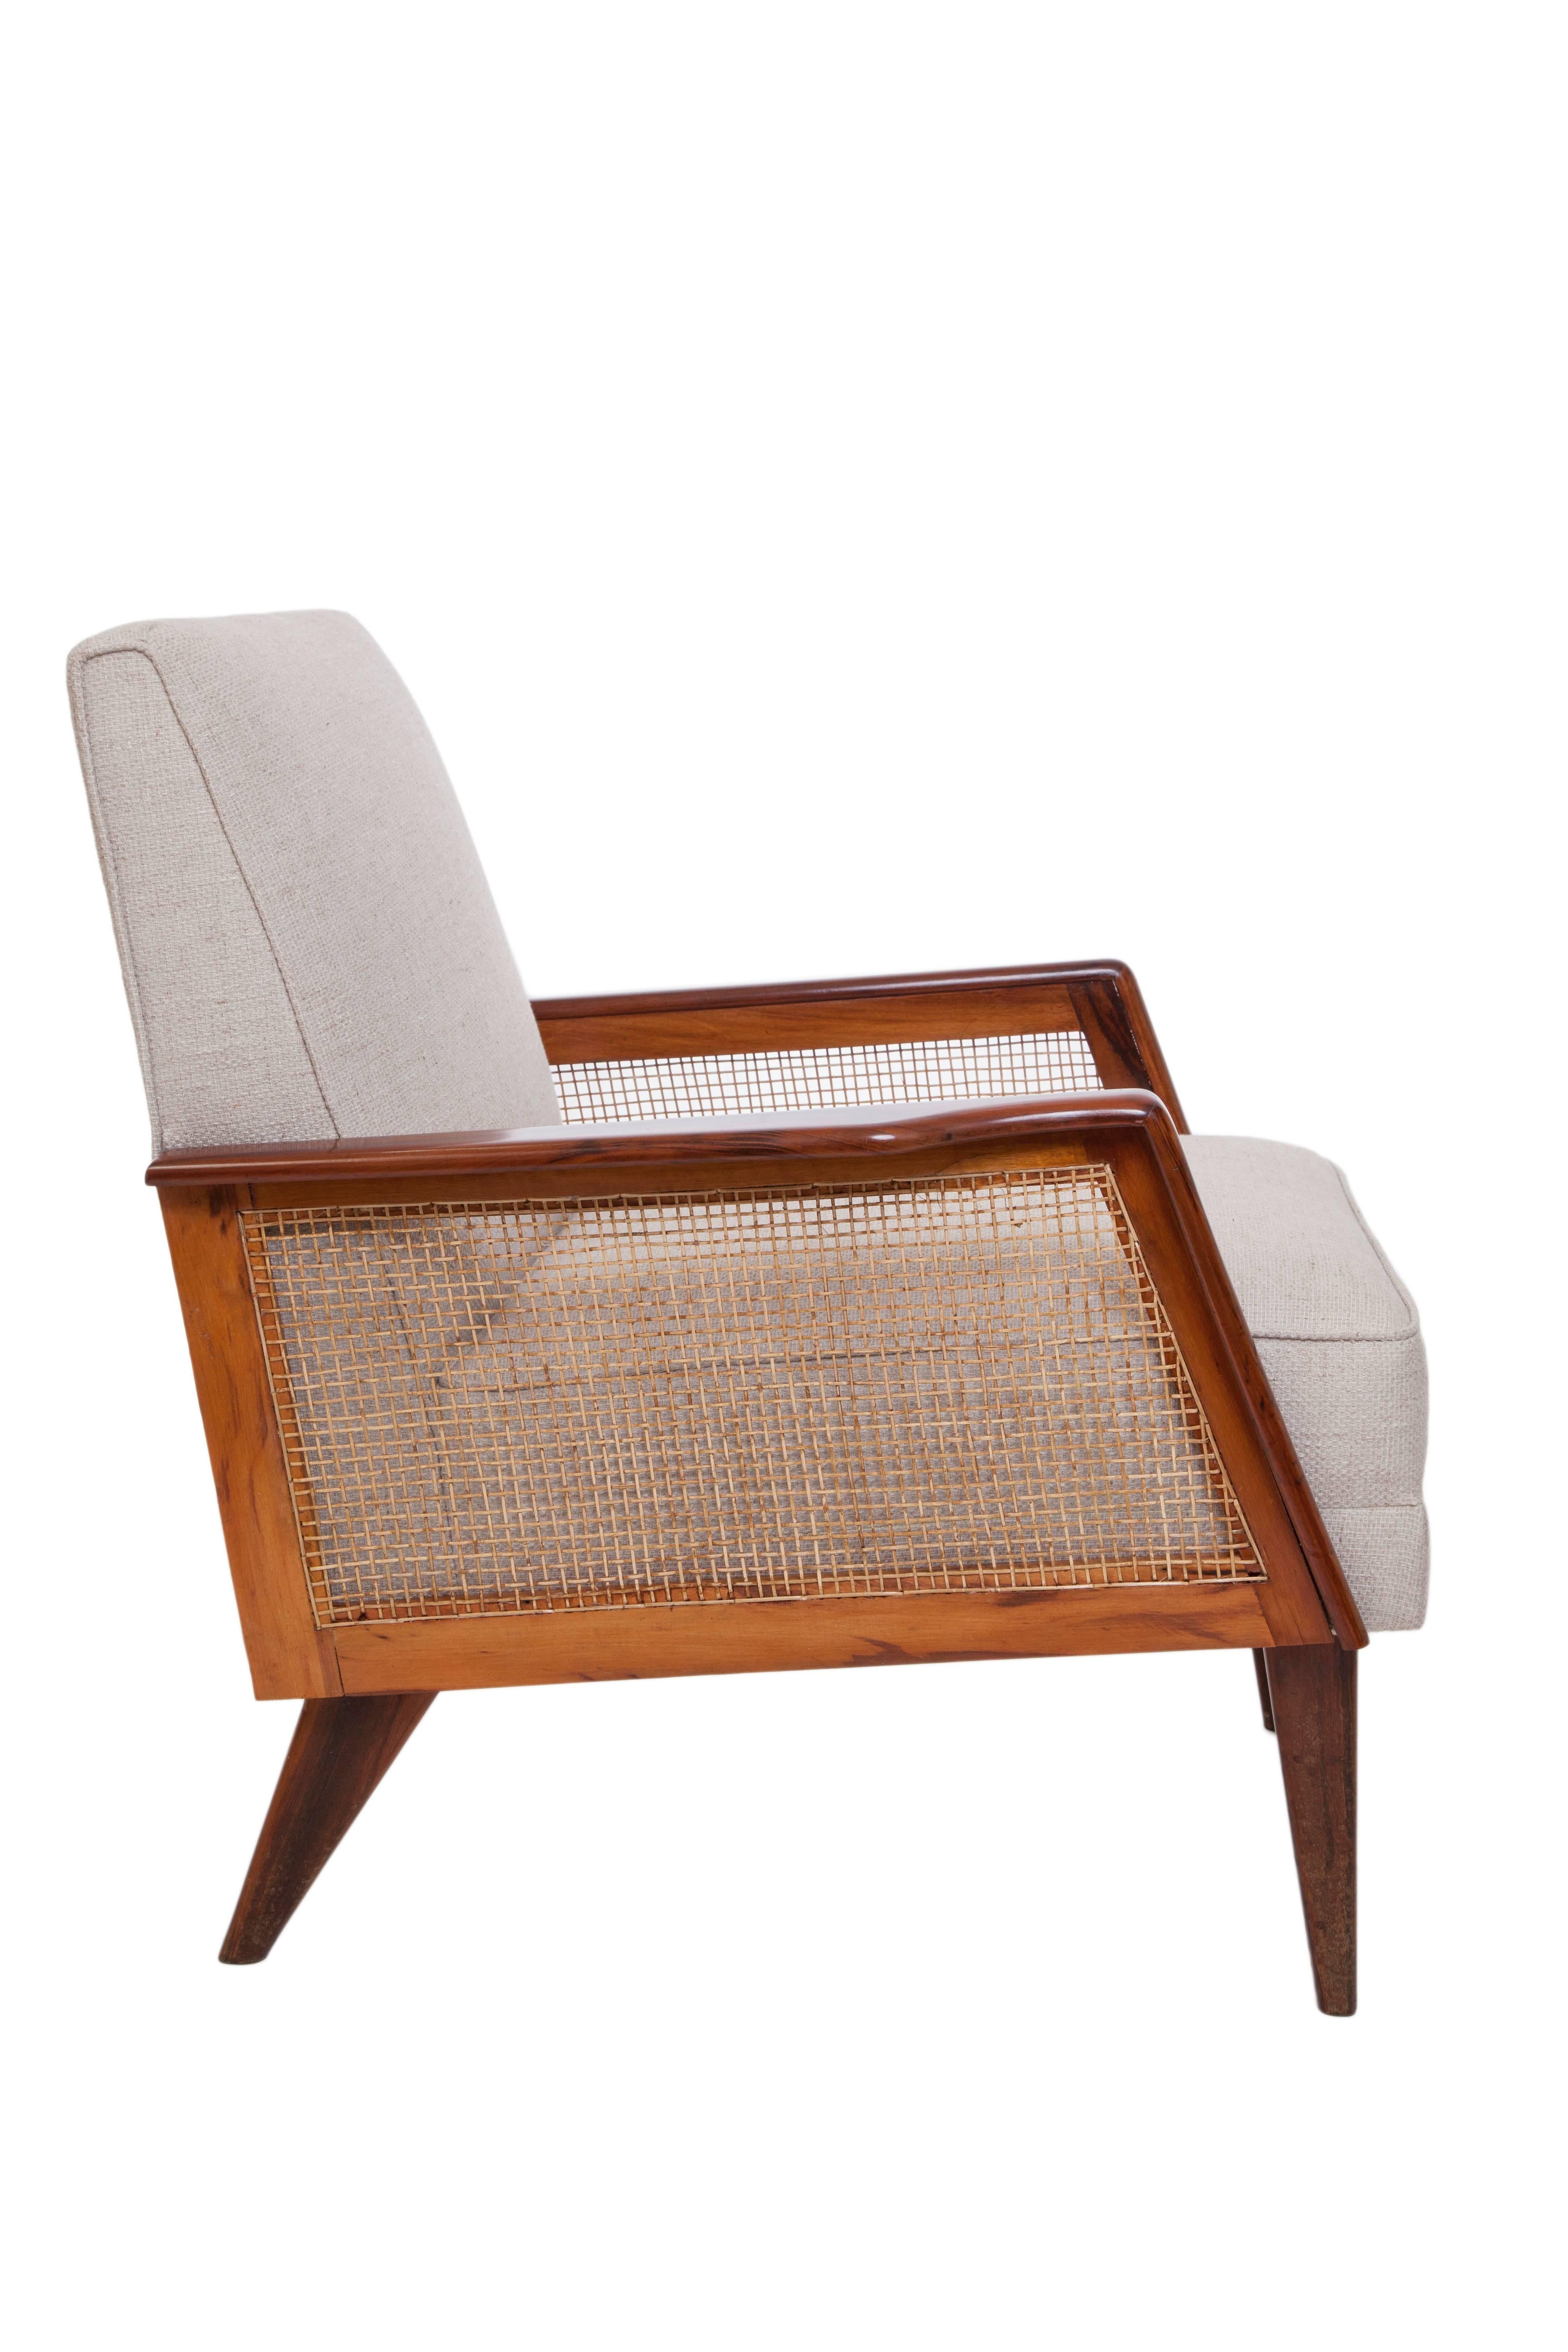 A vintage armchair, produced, circa 1950s, the cushioned back and seat upholstered in linen, with woven caned sides, against a beautiful Brazilian caviuna wood frame, on tapered legs. Very good vintage condition, with minimal age appropriate wear,